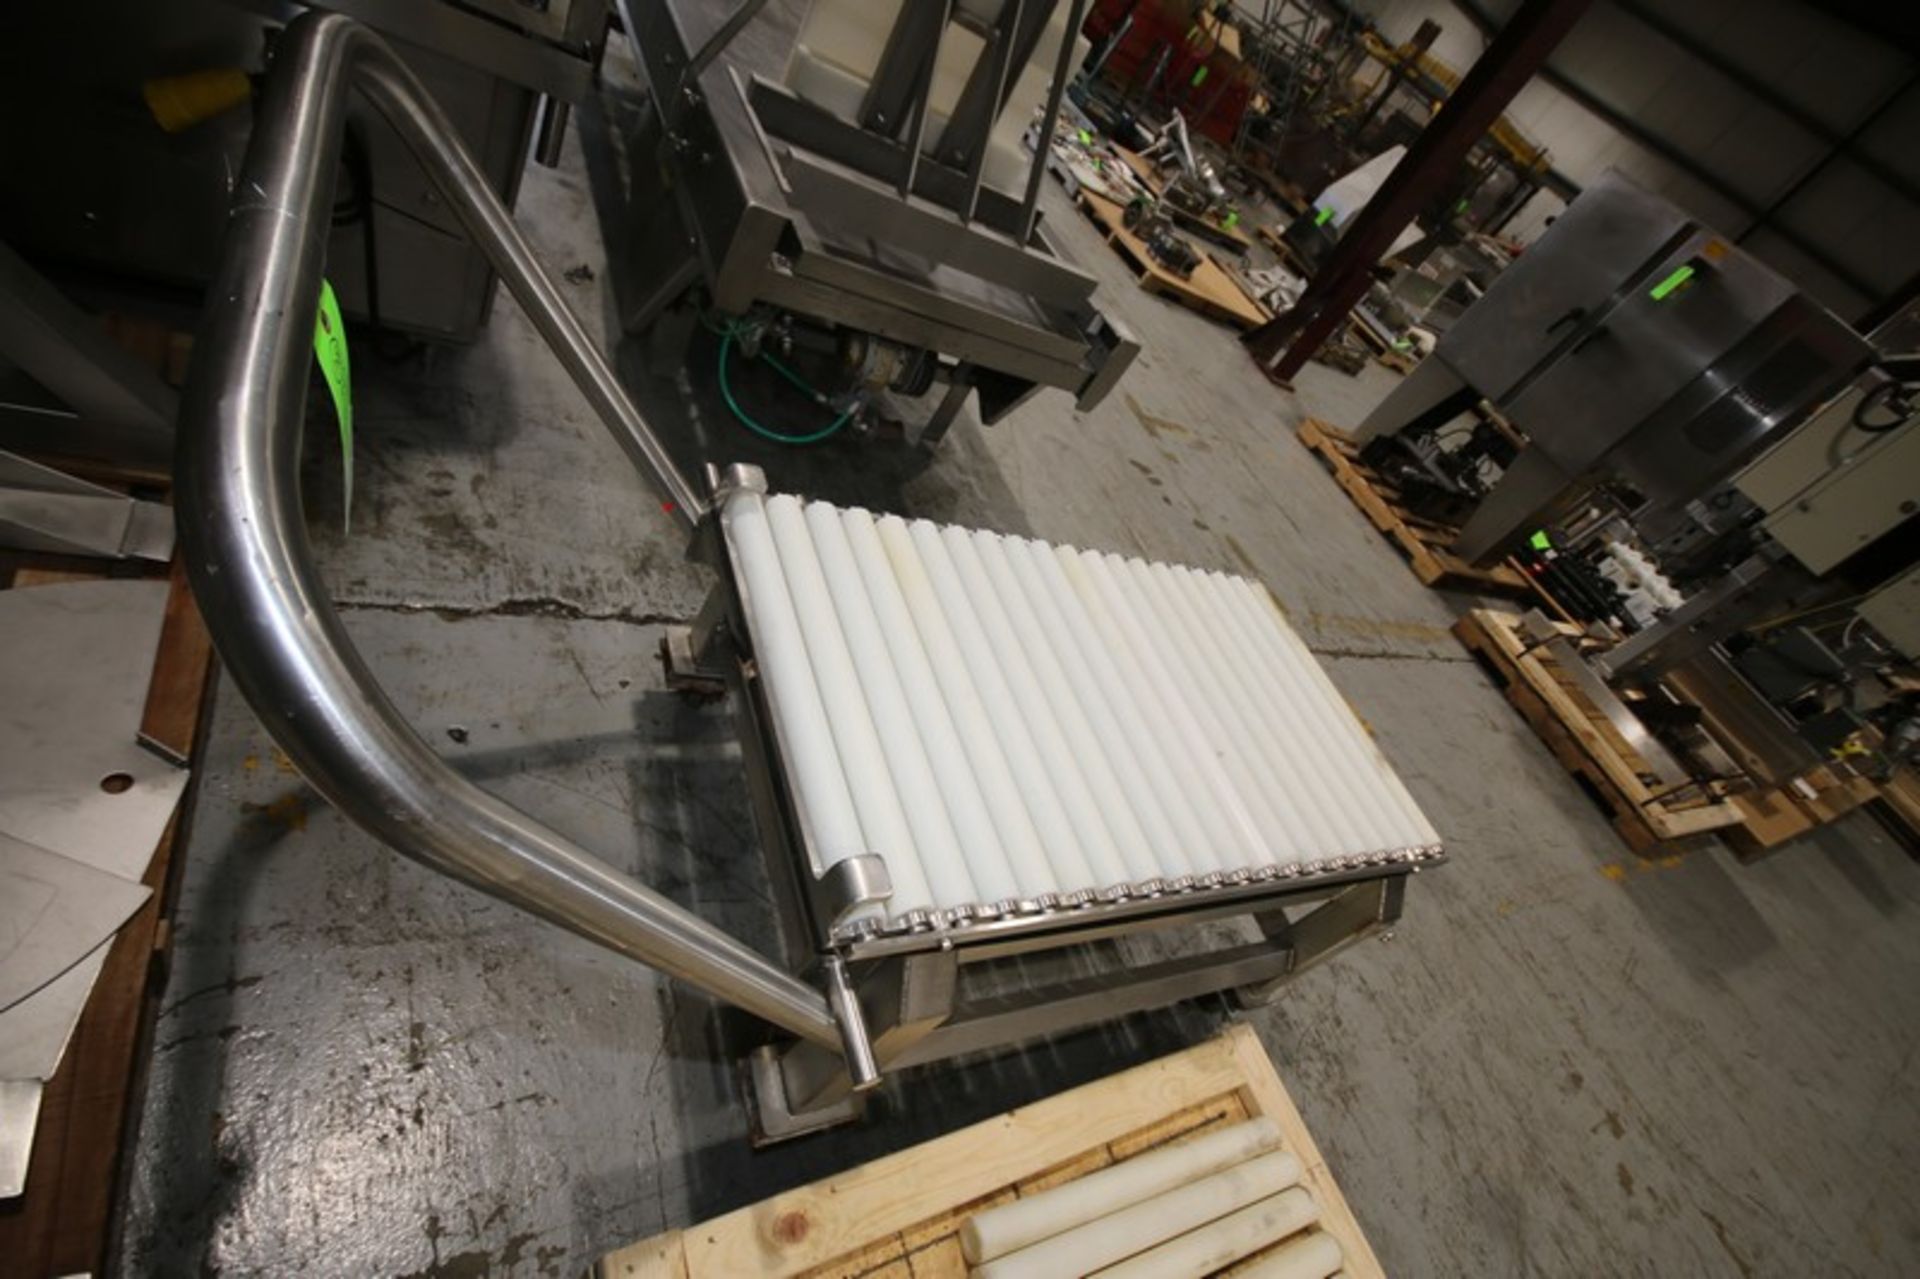 4' L x 26" W x 24" W H Portable S/S Cheese Block Conveyor, with Teflon Rollers, Includes Pallet of - Image 4 of 5